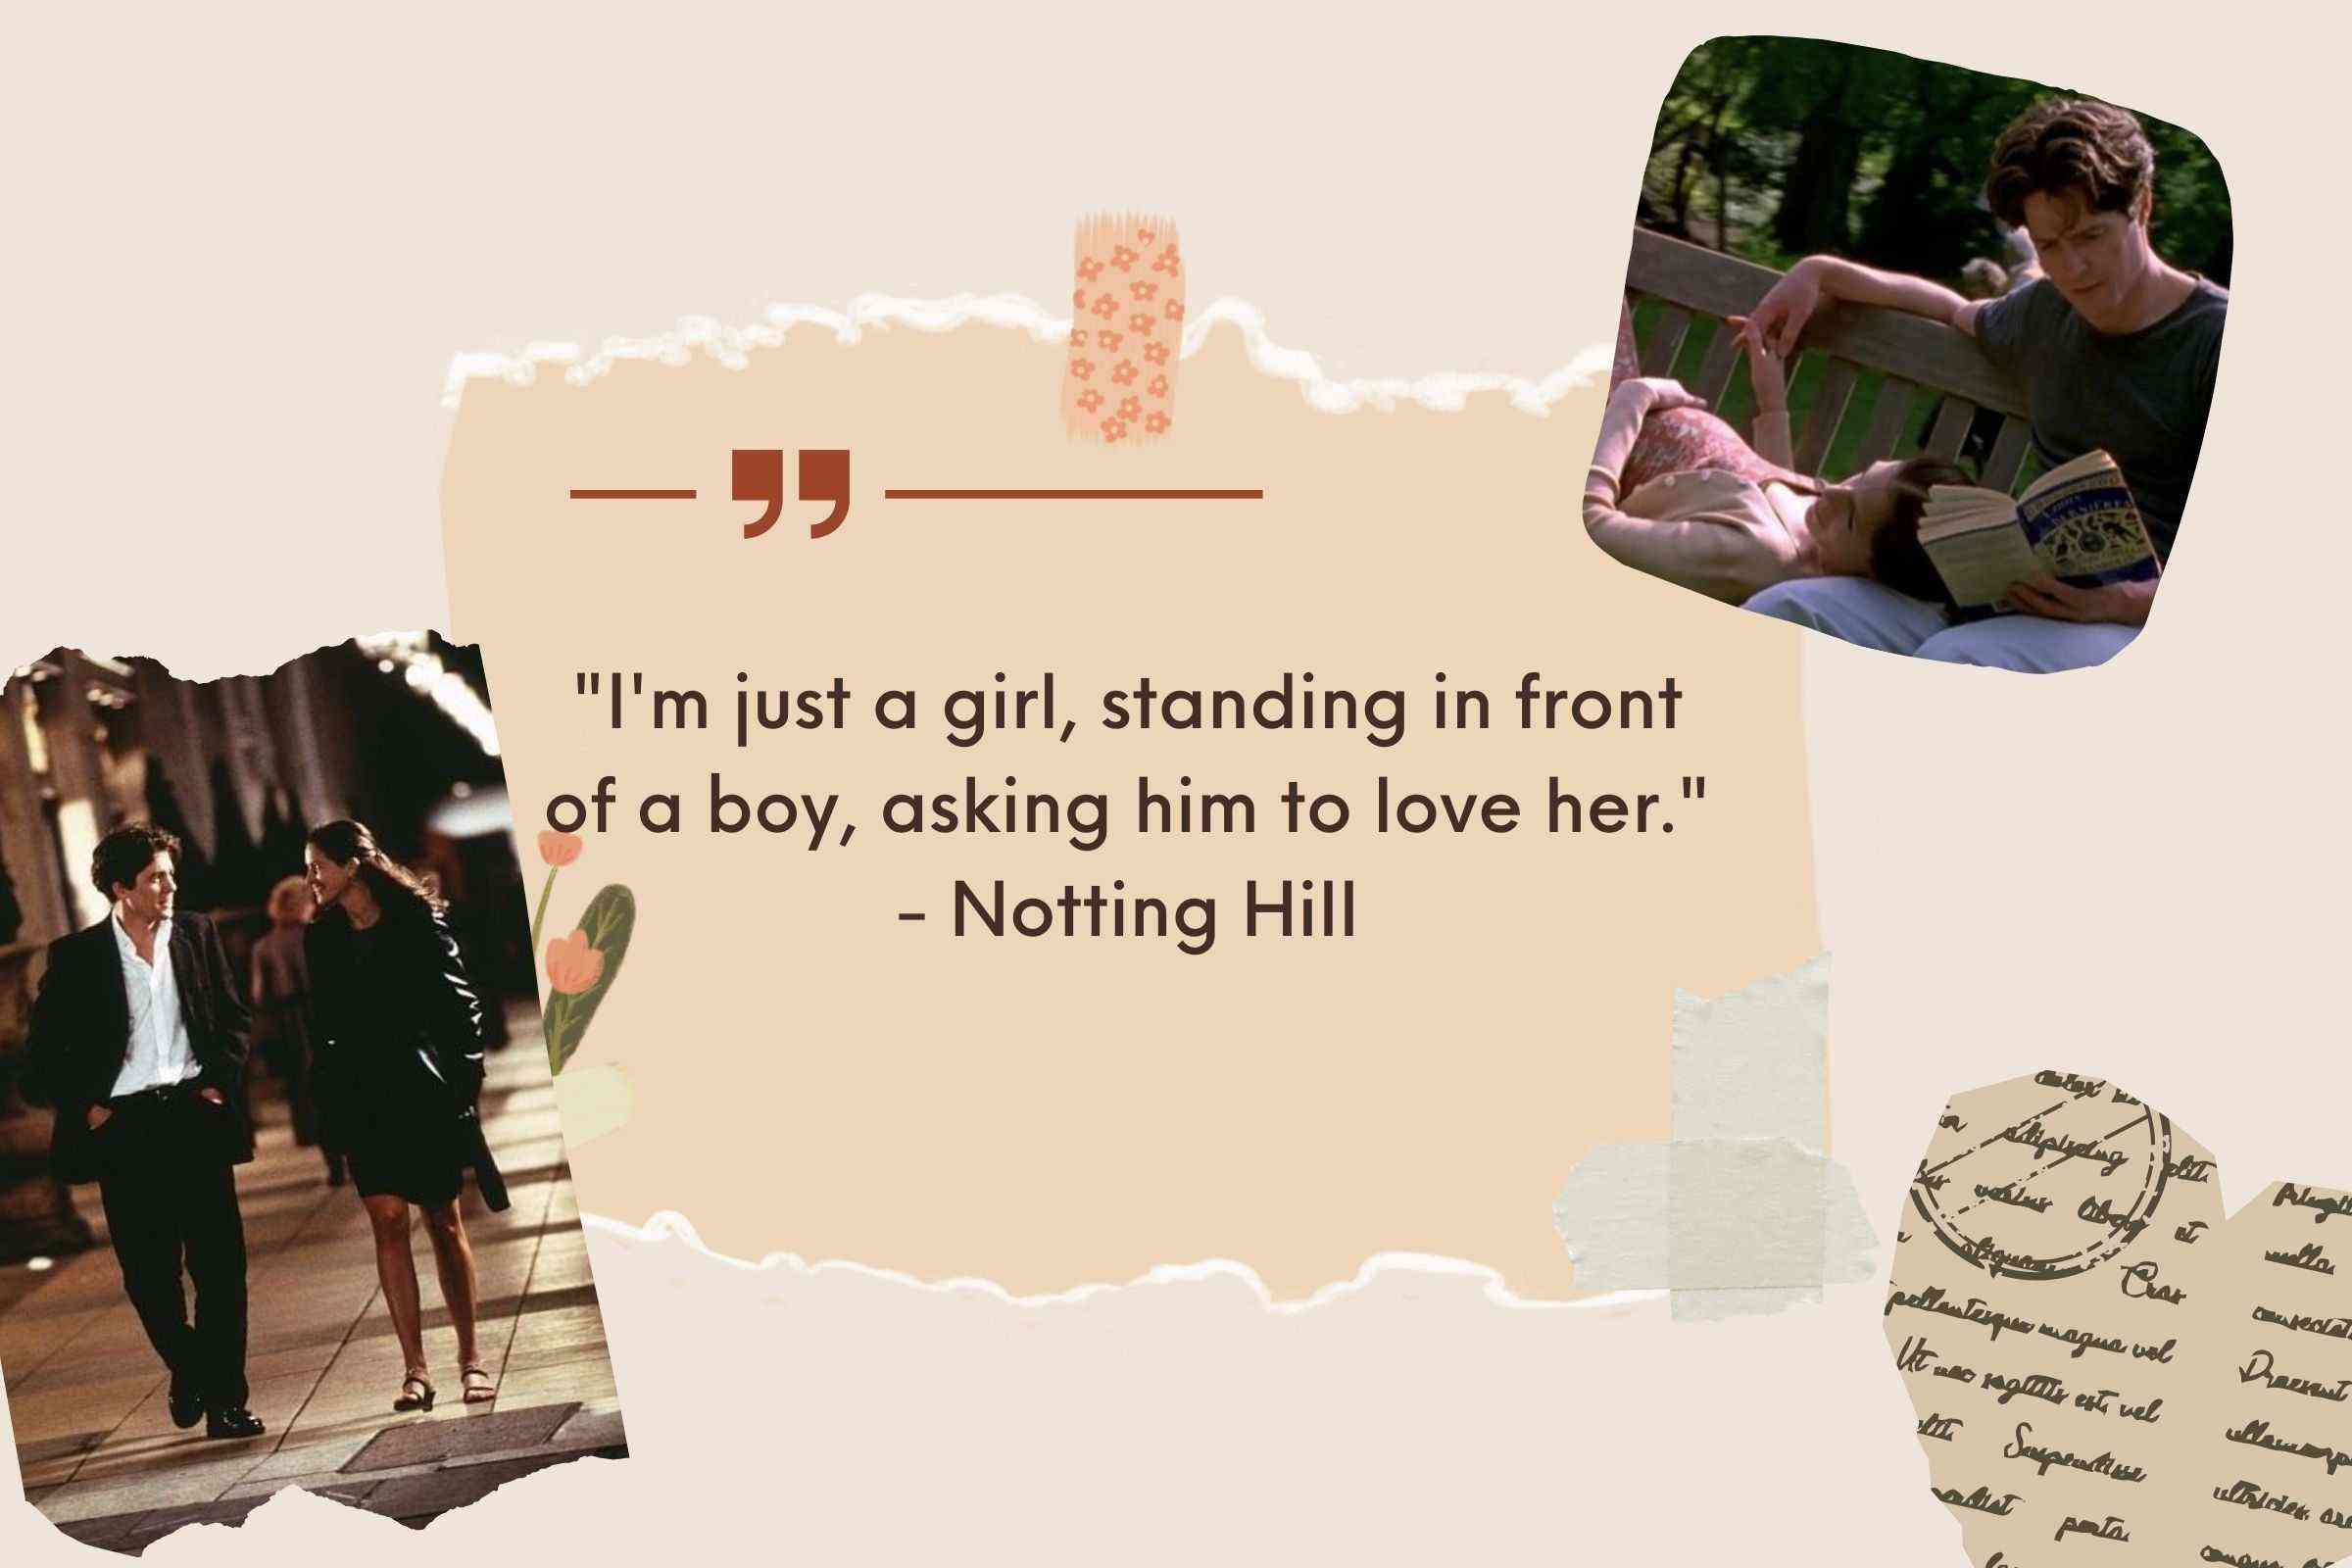 "I'm just a girl, standing in front of a boy, asking him to love her." - Notting Hill